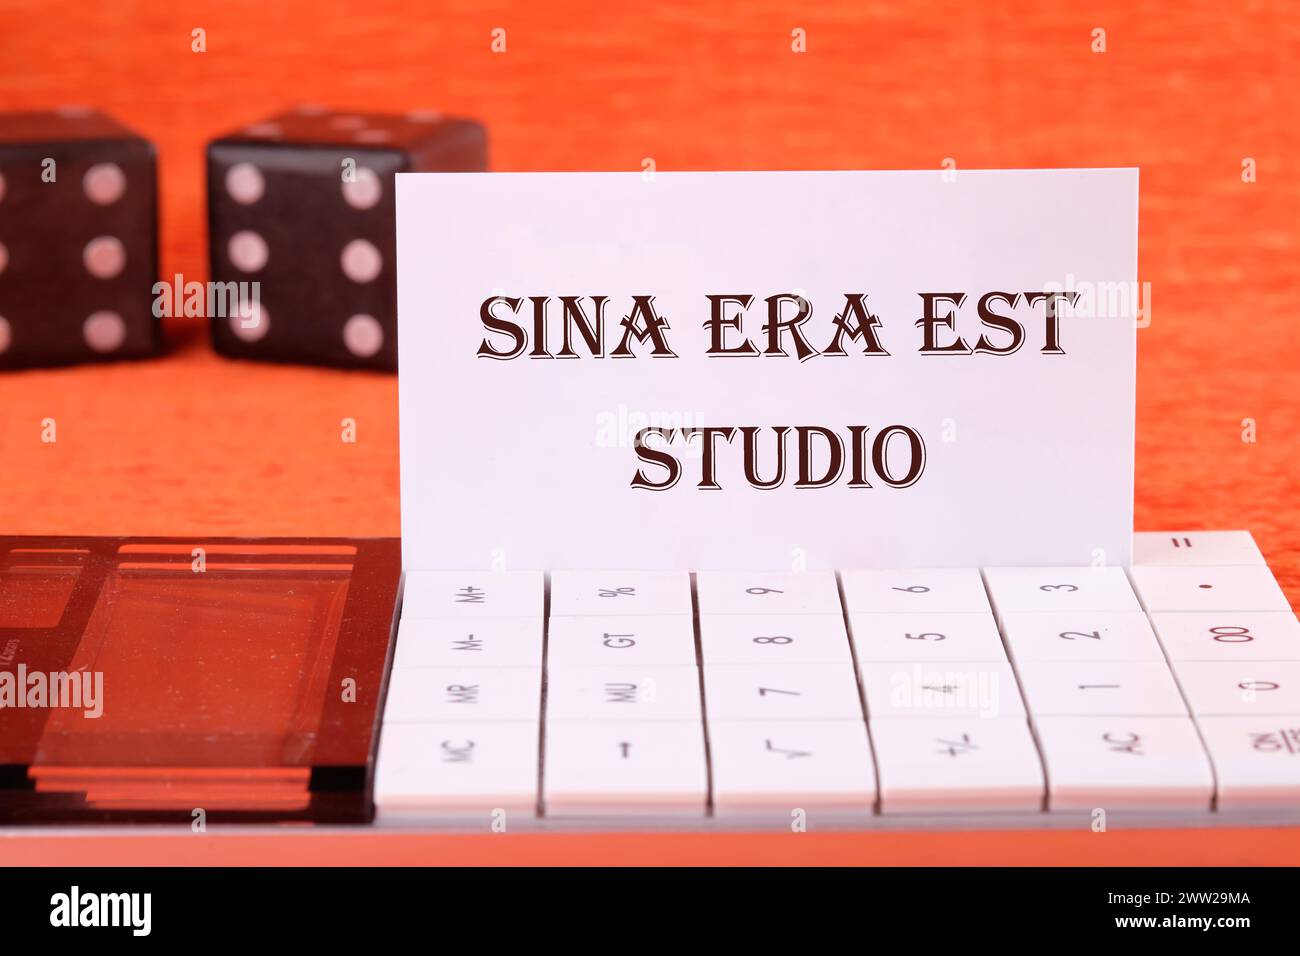 Sina era est studio It means Without anger and addiction on a white business card on a calculator on an orange background Stock Photo